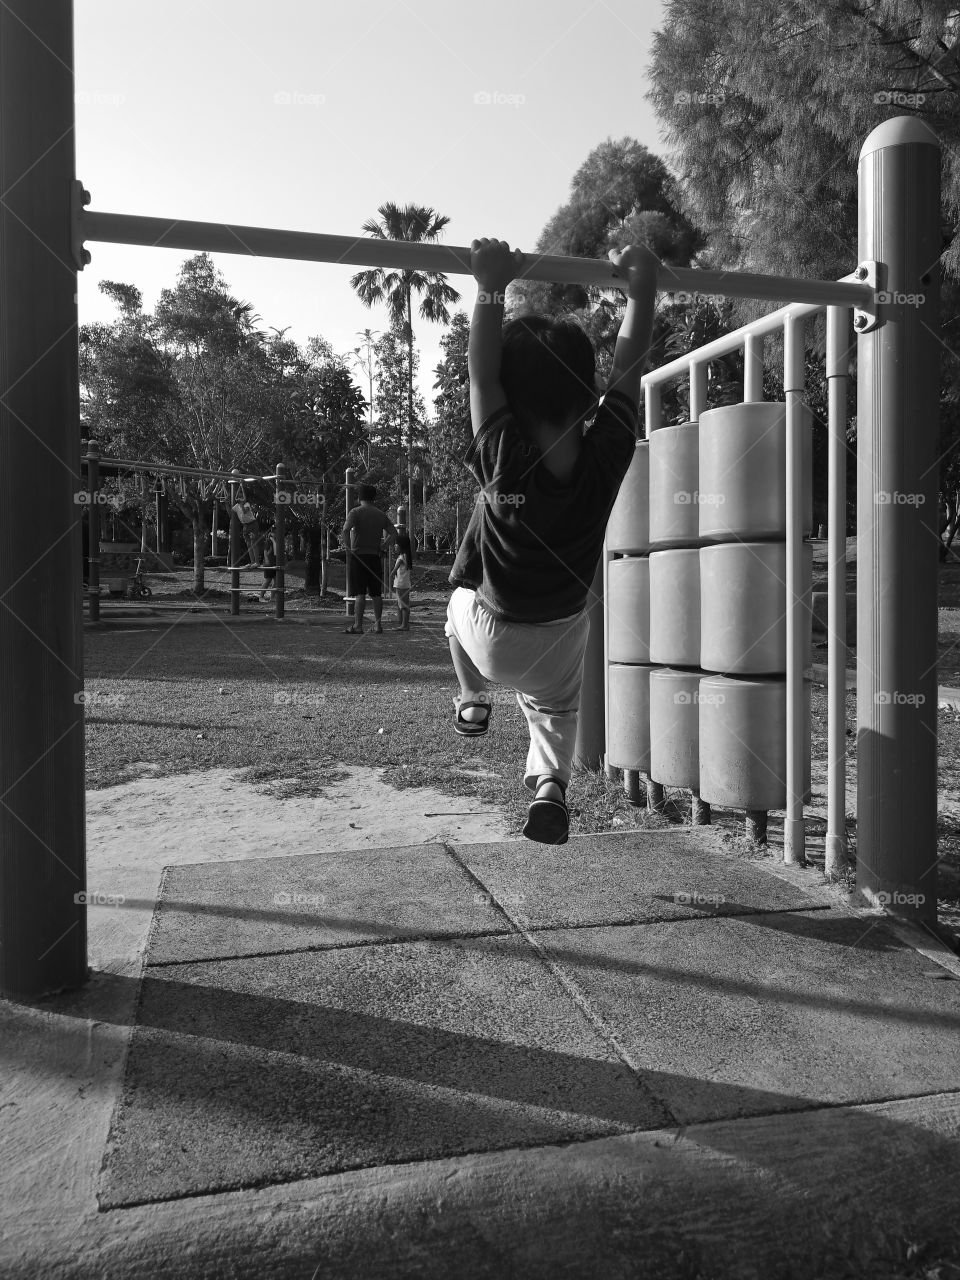 My son play hanging on a steel bar at a playground